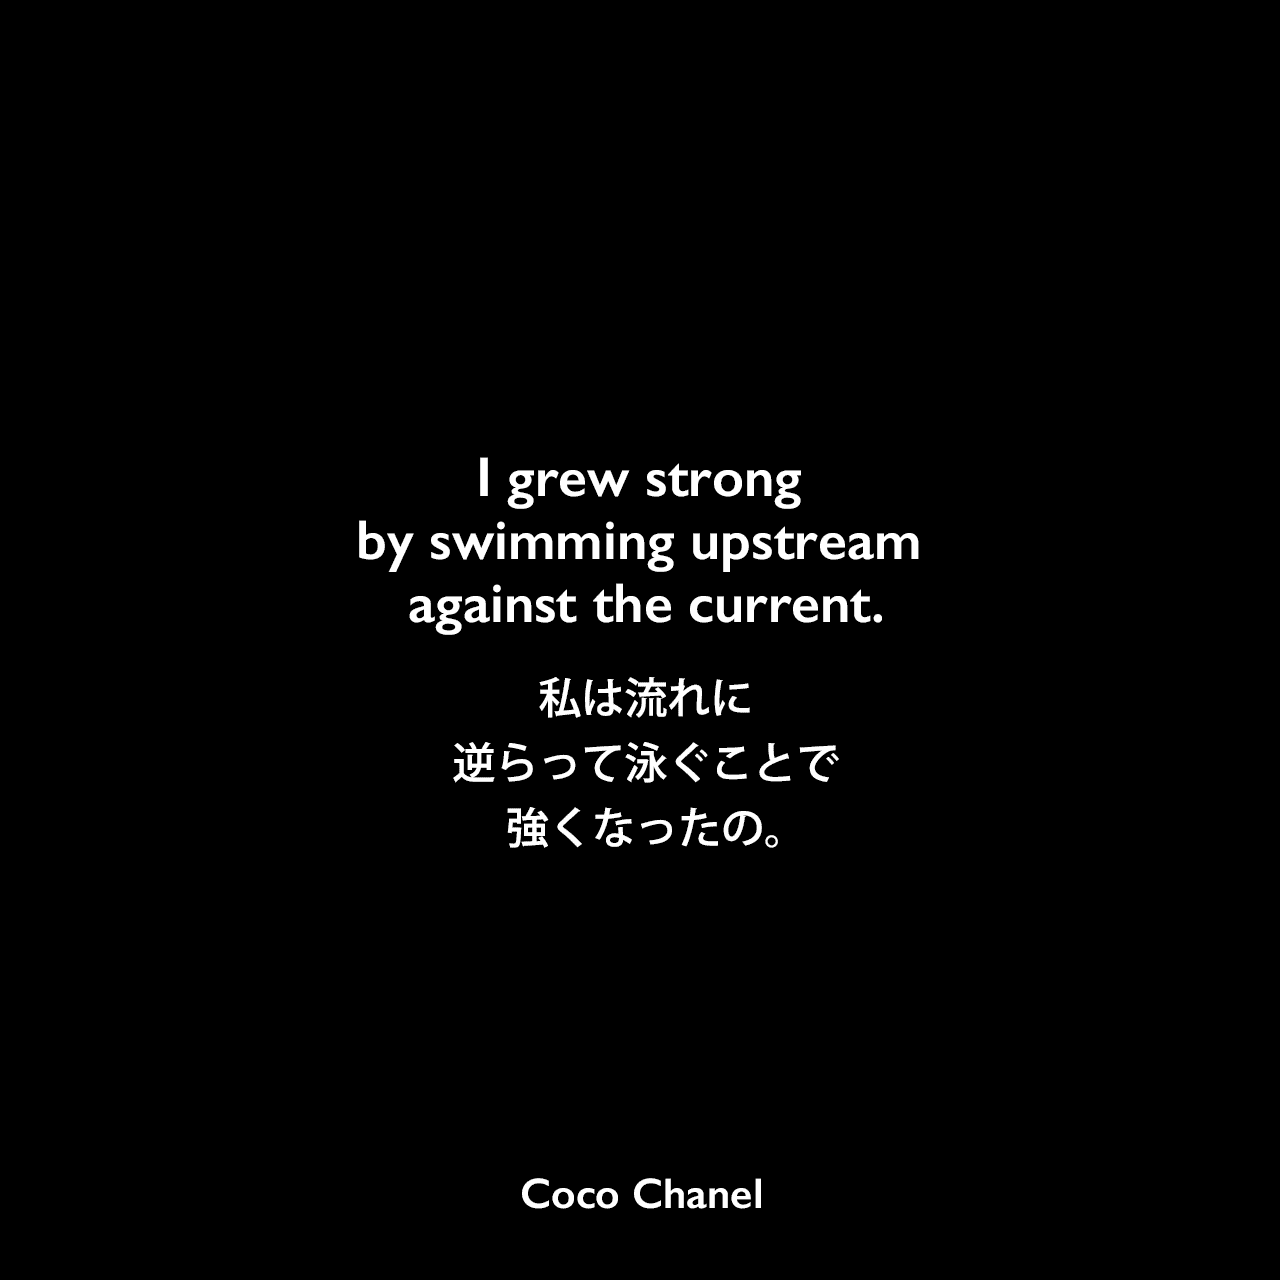 I grew strong by swimming upstream against the current.私は流れに逆らって泳ぐことで強くなったの。Coco Chanel